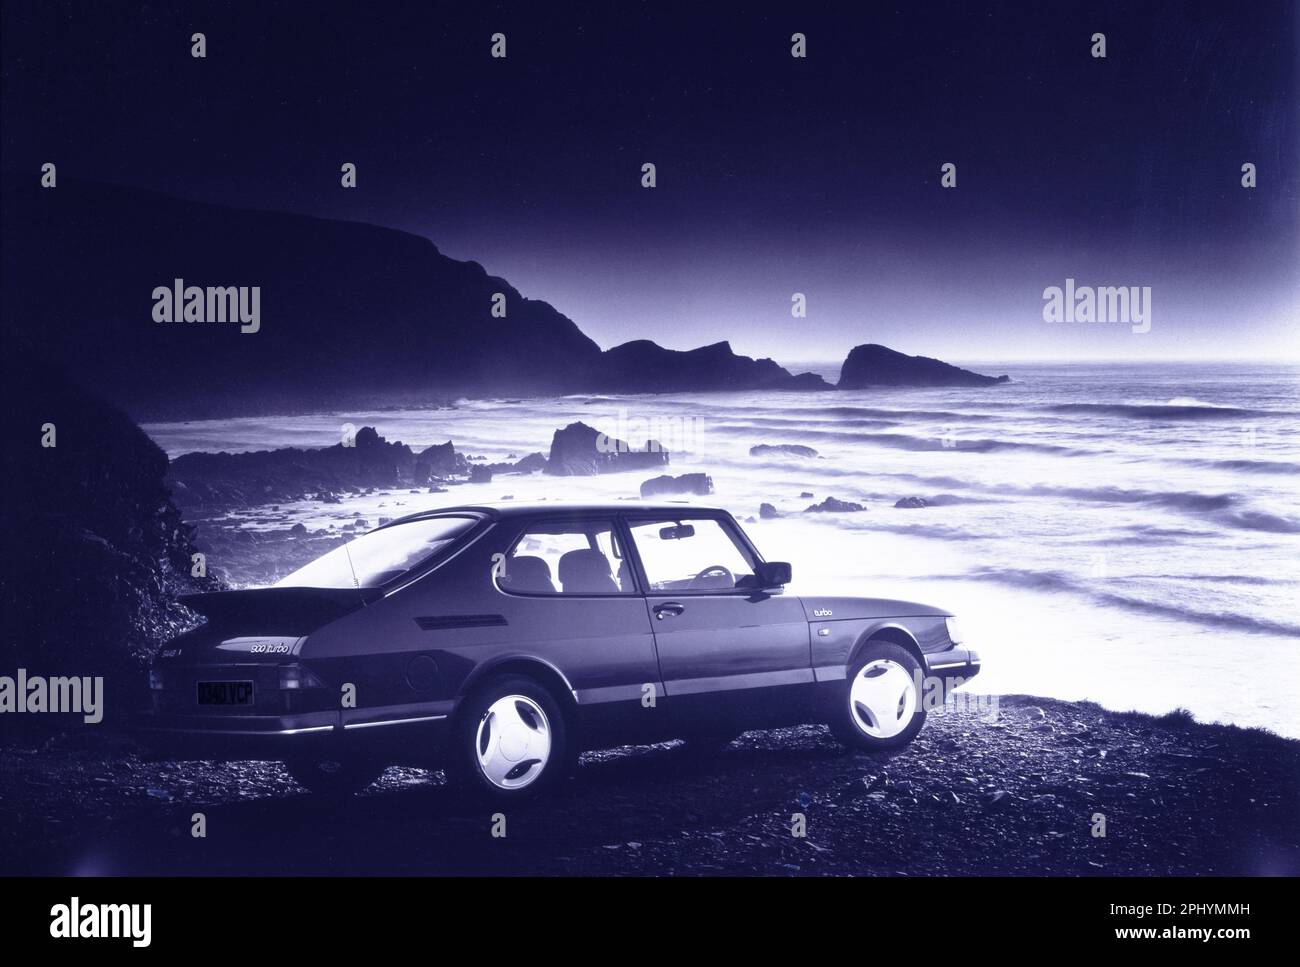 Scanned image of a Classic Saab Turbo car on a deserted beach in Devon, UK shot on film circa 1994 Stock Photo